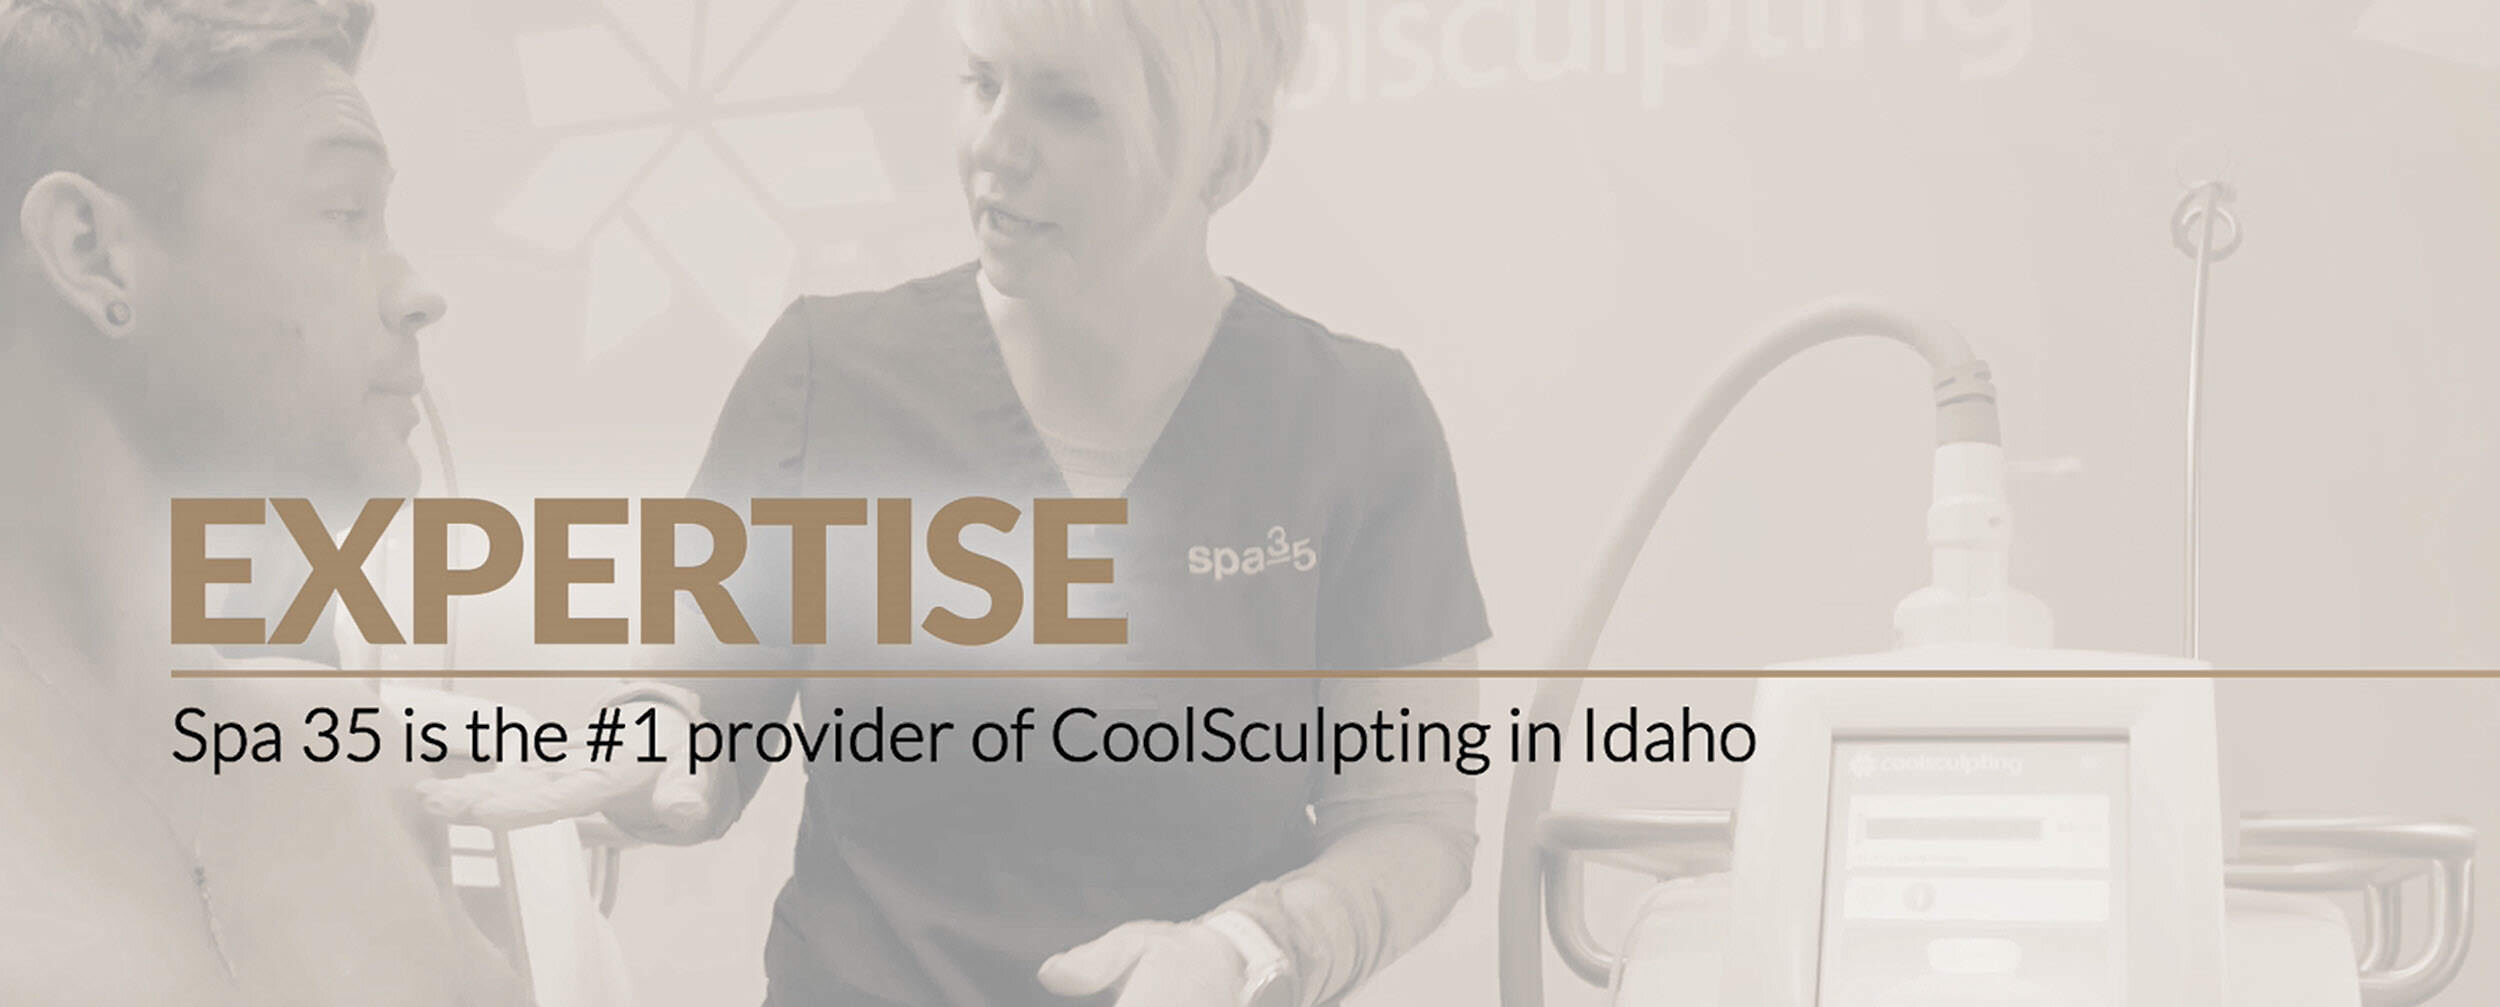 Master Certified in CoolSculpting, Consultant to Candela Medical - Worldwide Leader in Cosmetic Lasers